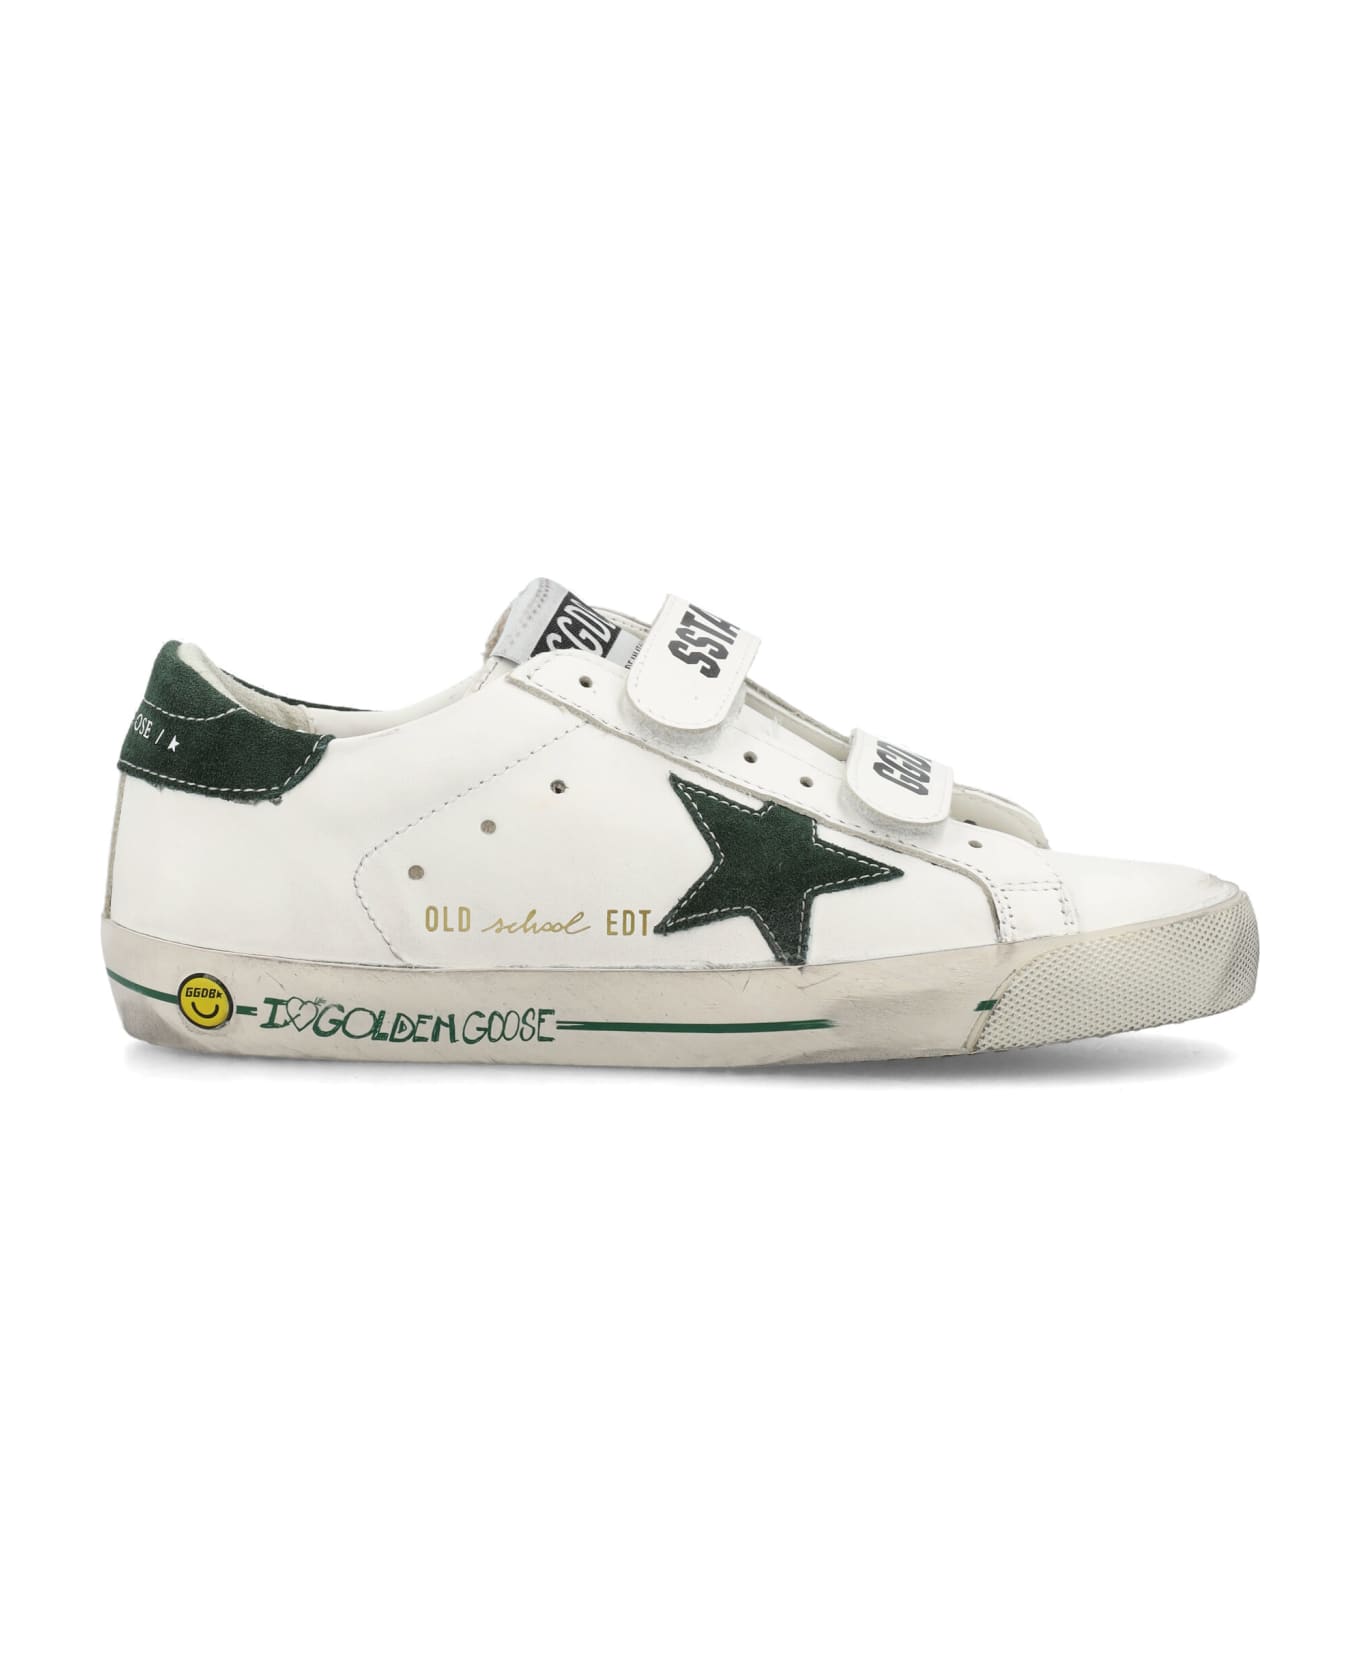 Golden Goose Old School Leather Sneakers - WHITE/GREEN